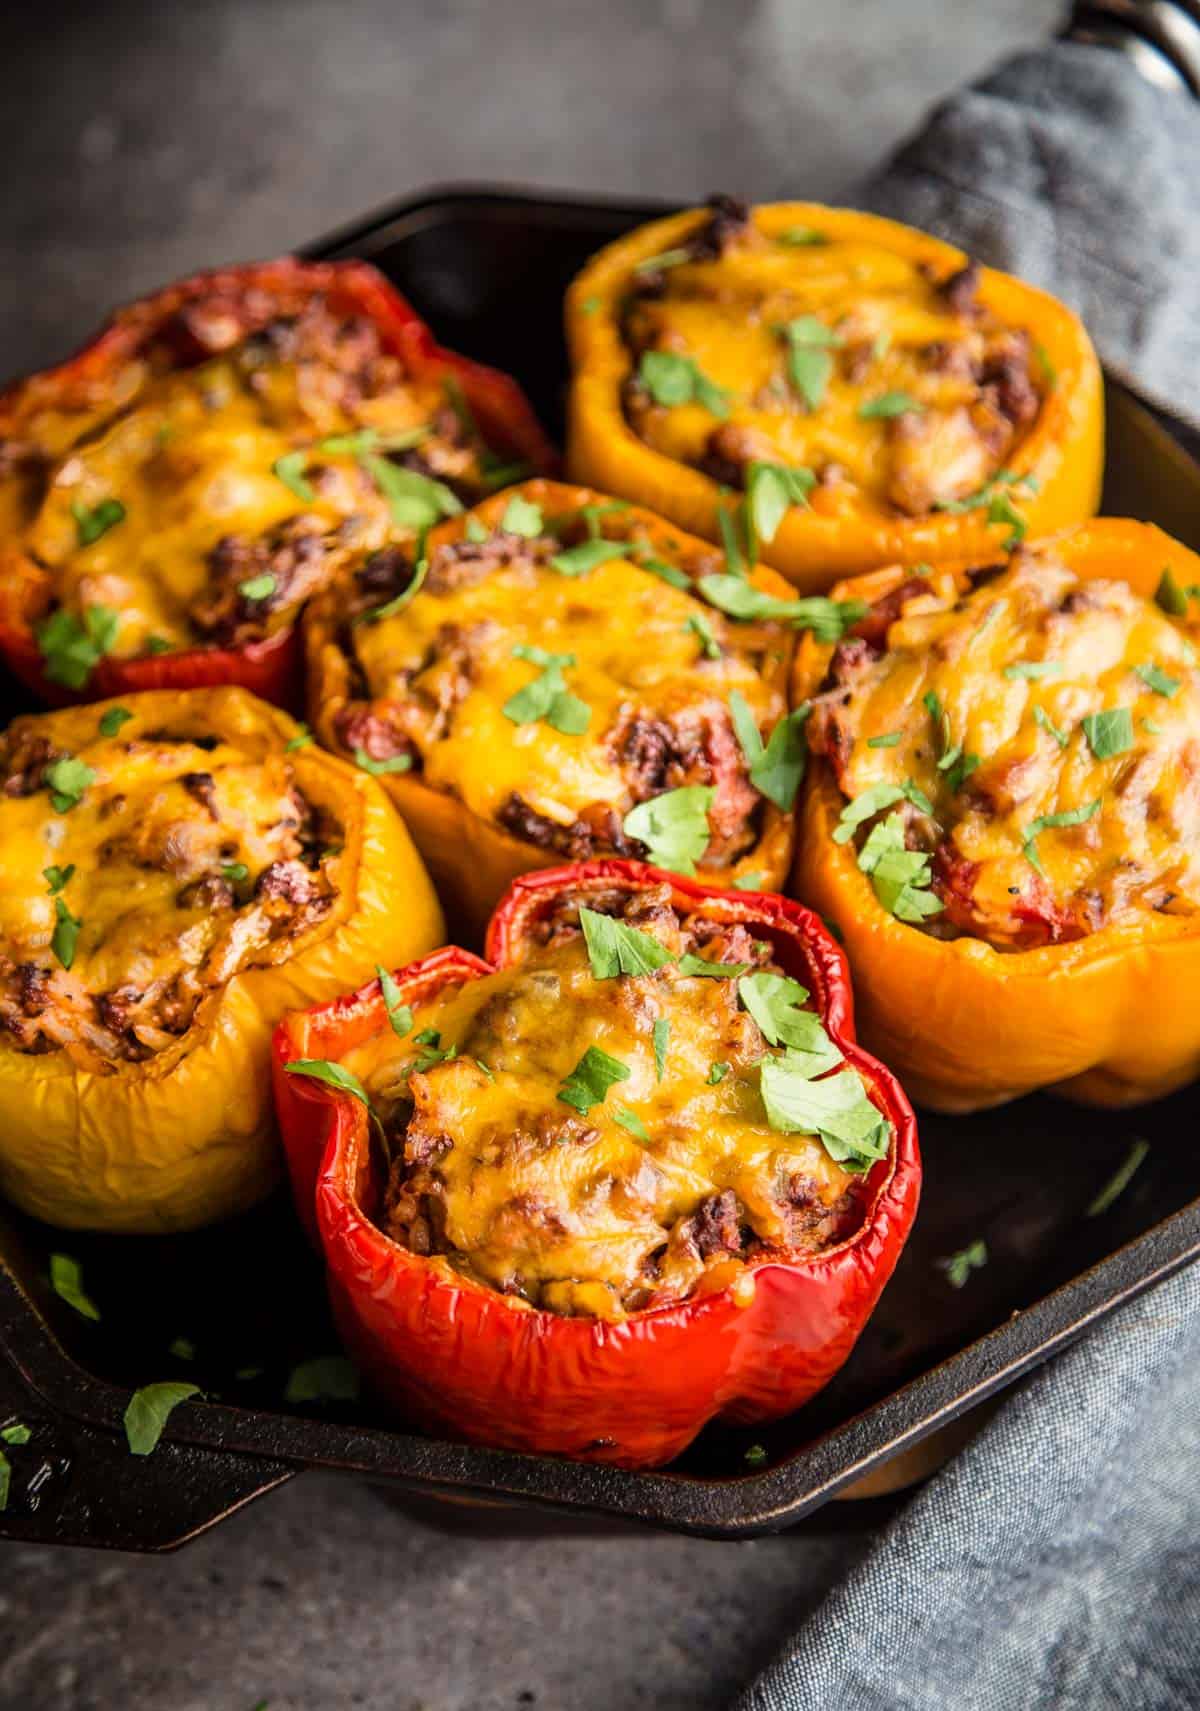 Stuffed Peppers With Ground Beef On The Grill Vindulge,What Temp To Cook Chicken Breast In Oven